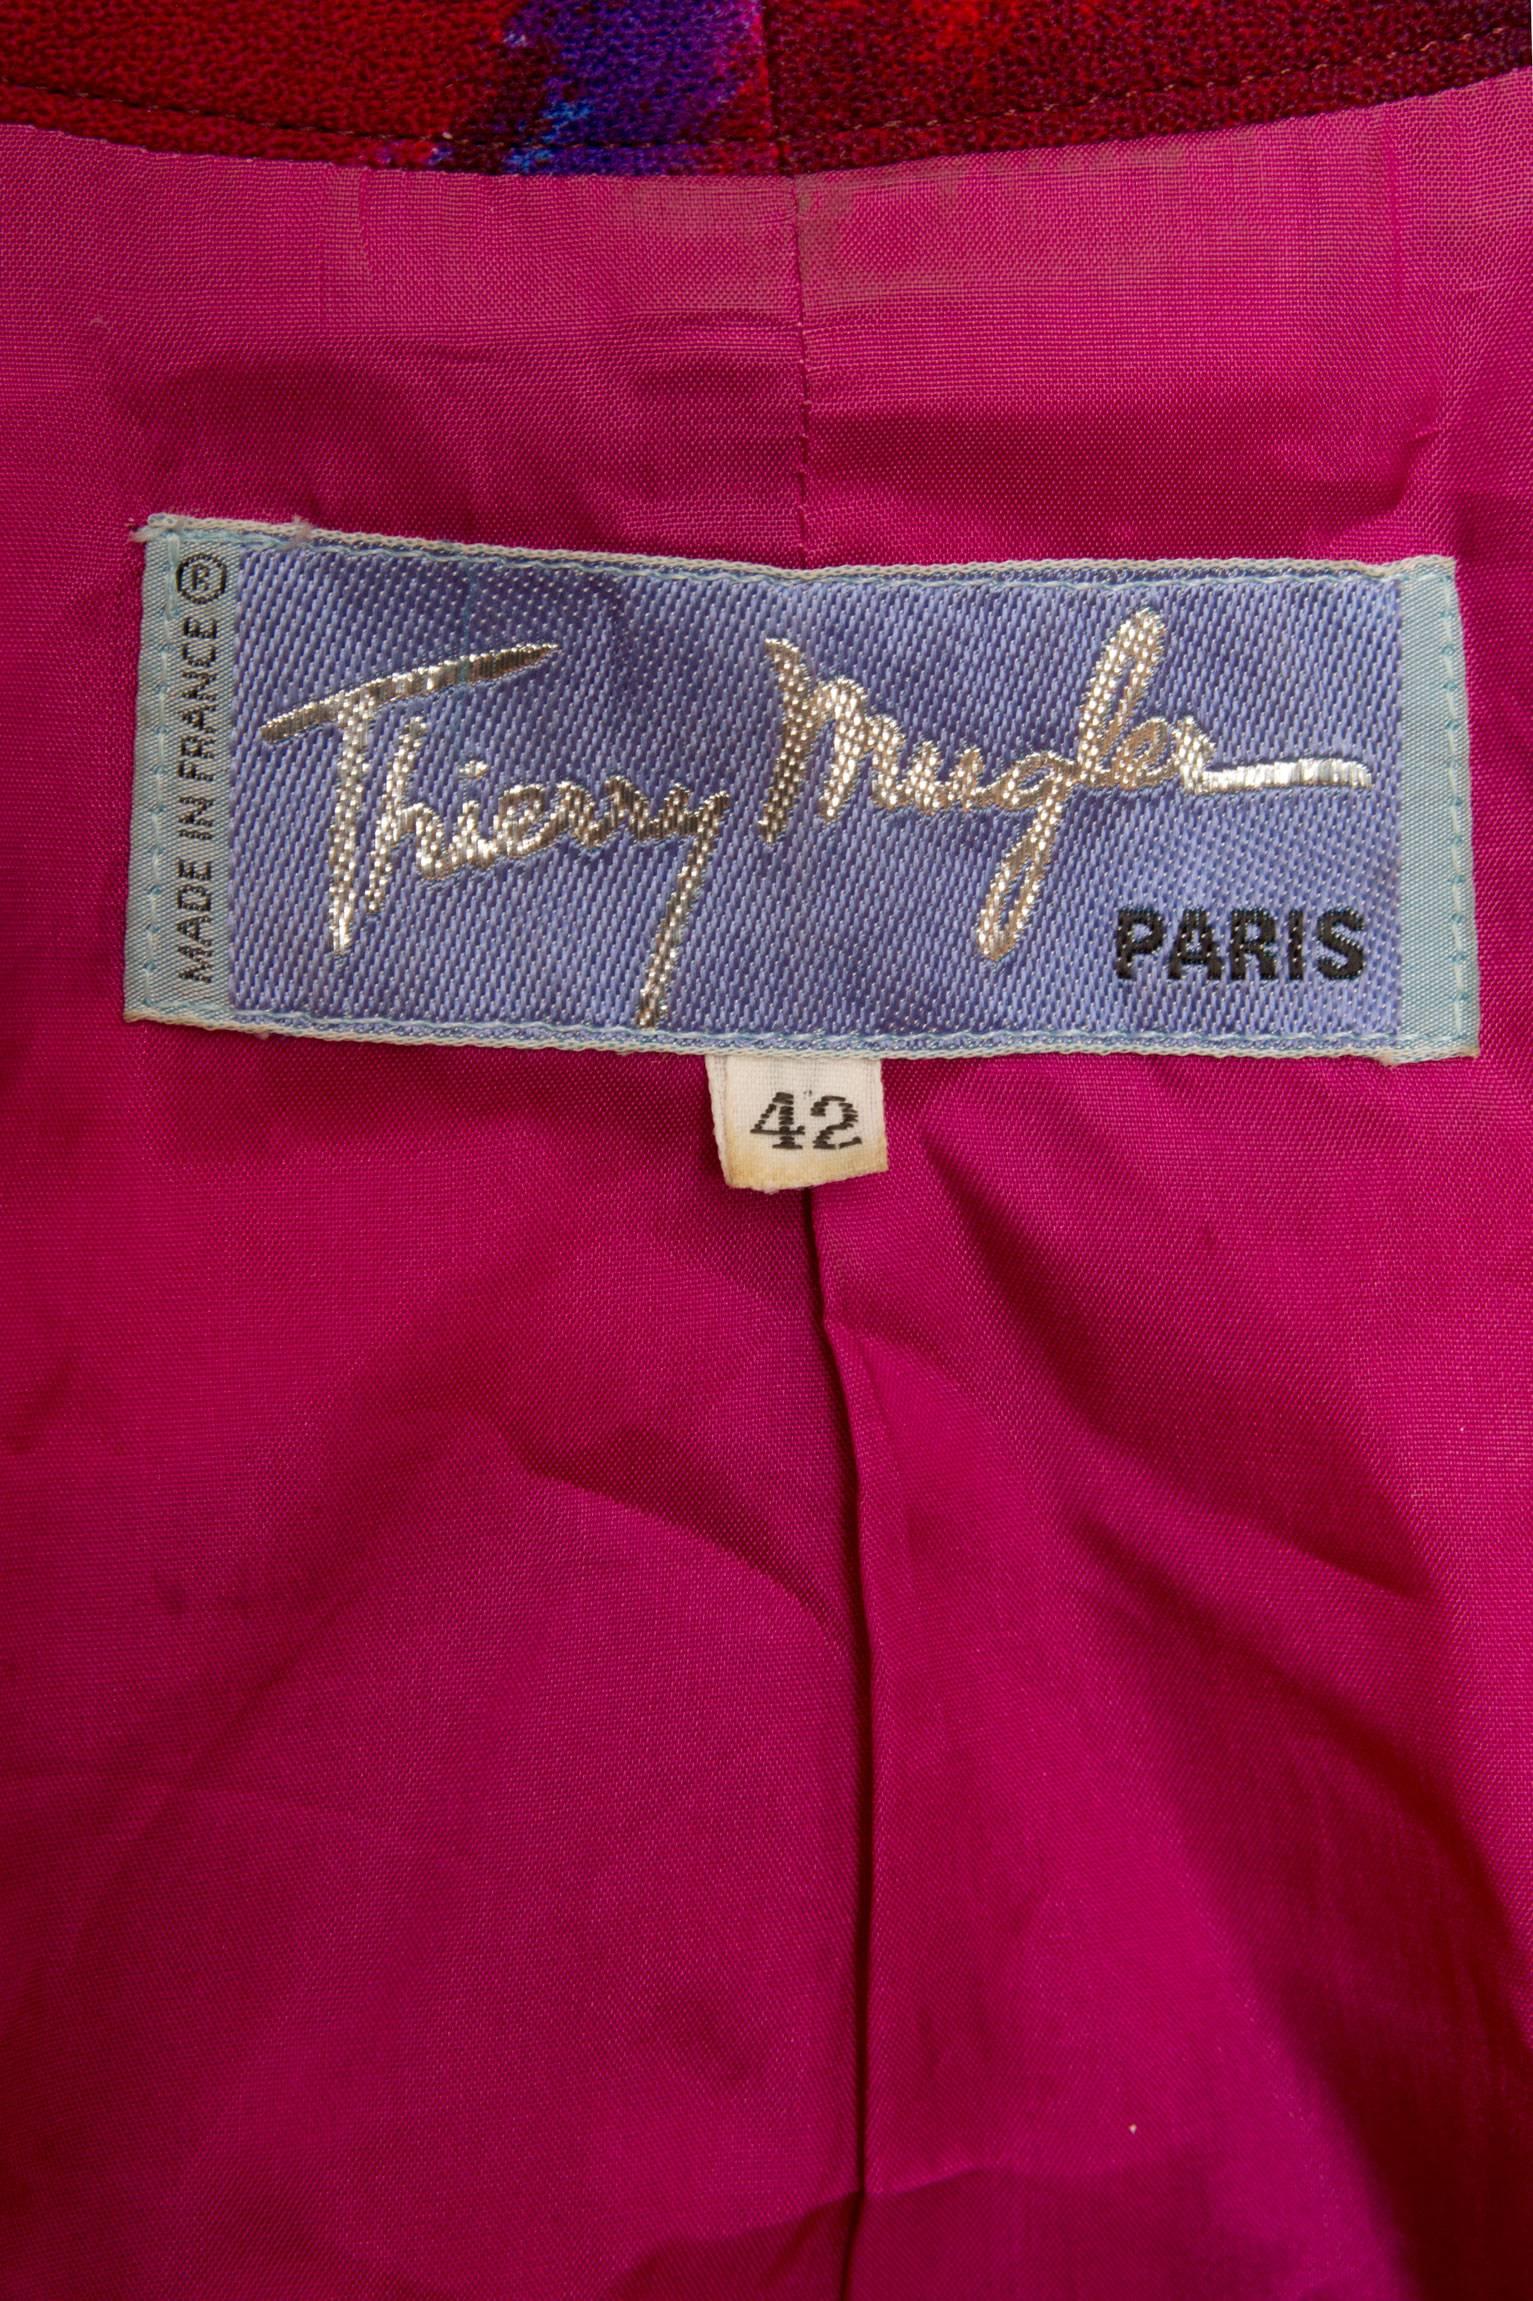 A stunning 1980s Thierry Mugler wool blazer with an asymmetrical hemline and a push button closure. The blazer have long tapered sleeves with structured shoulders held in place by shoulder-pads. The color combination is absolutely stunning and the